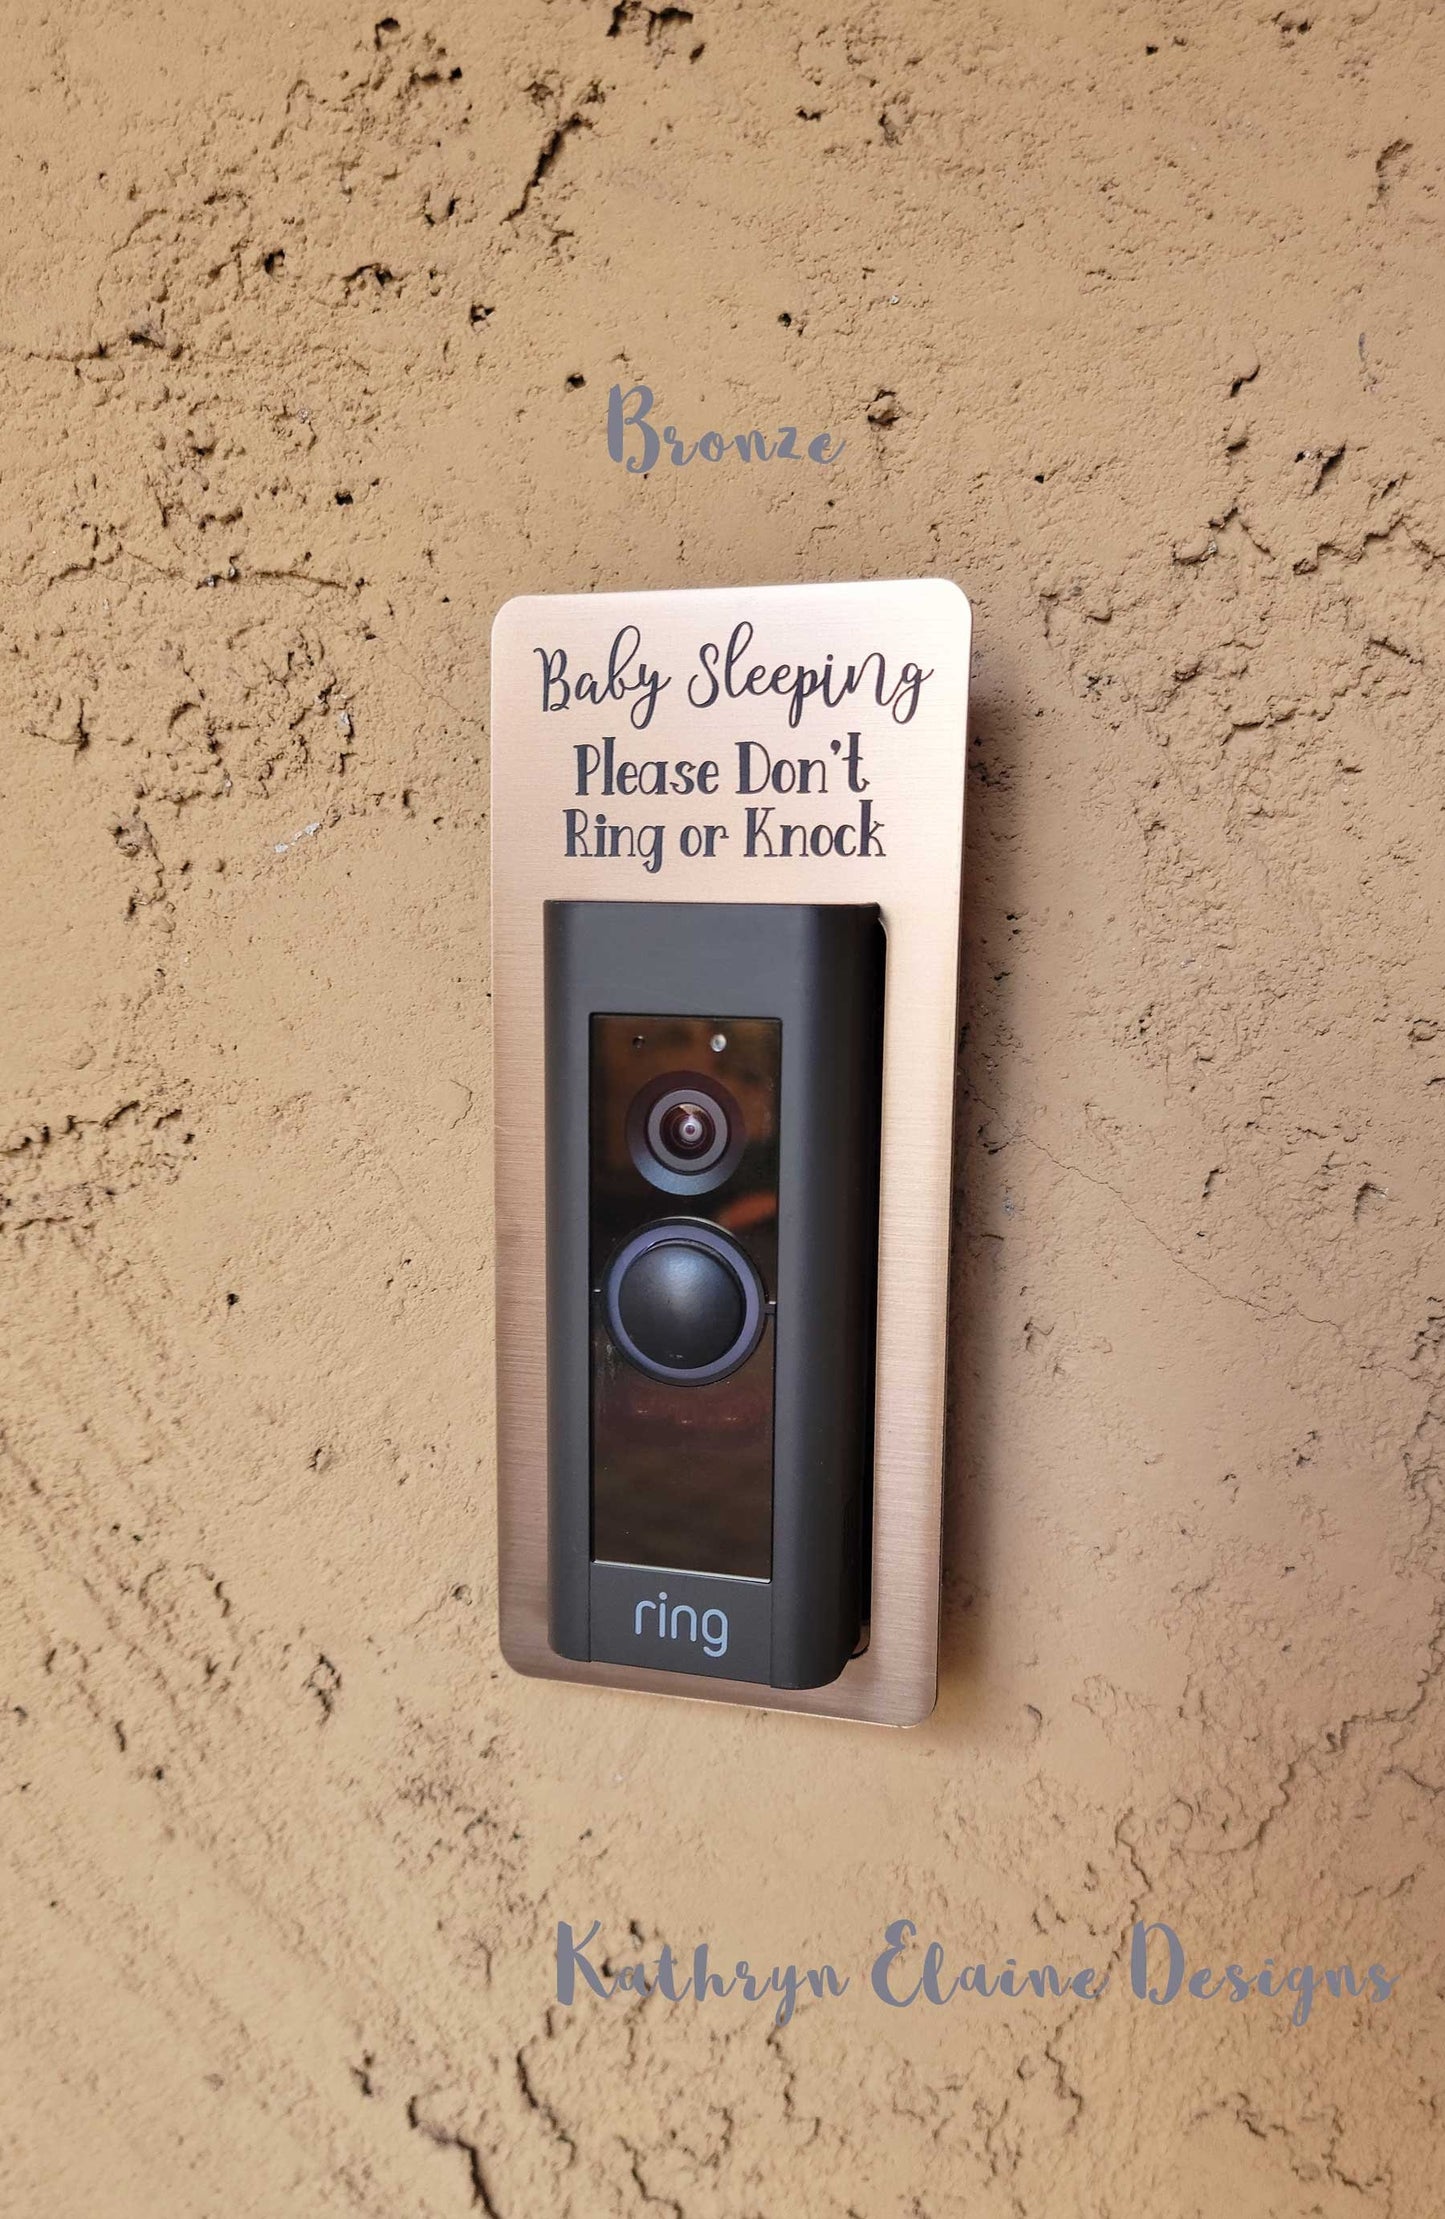 Bronze laminate rectangle around Ring doorbell that says Baby Sleeping Please Don't Ring or Knock in gray lettering against tan stucco background